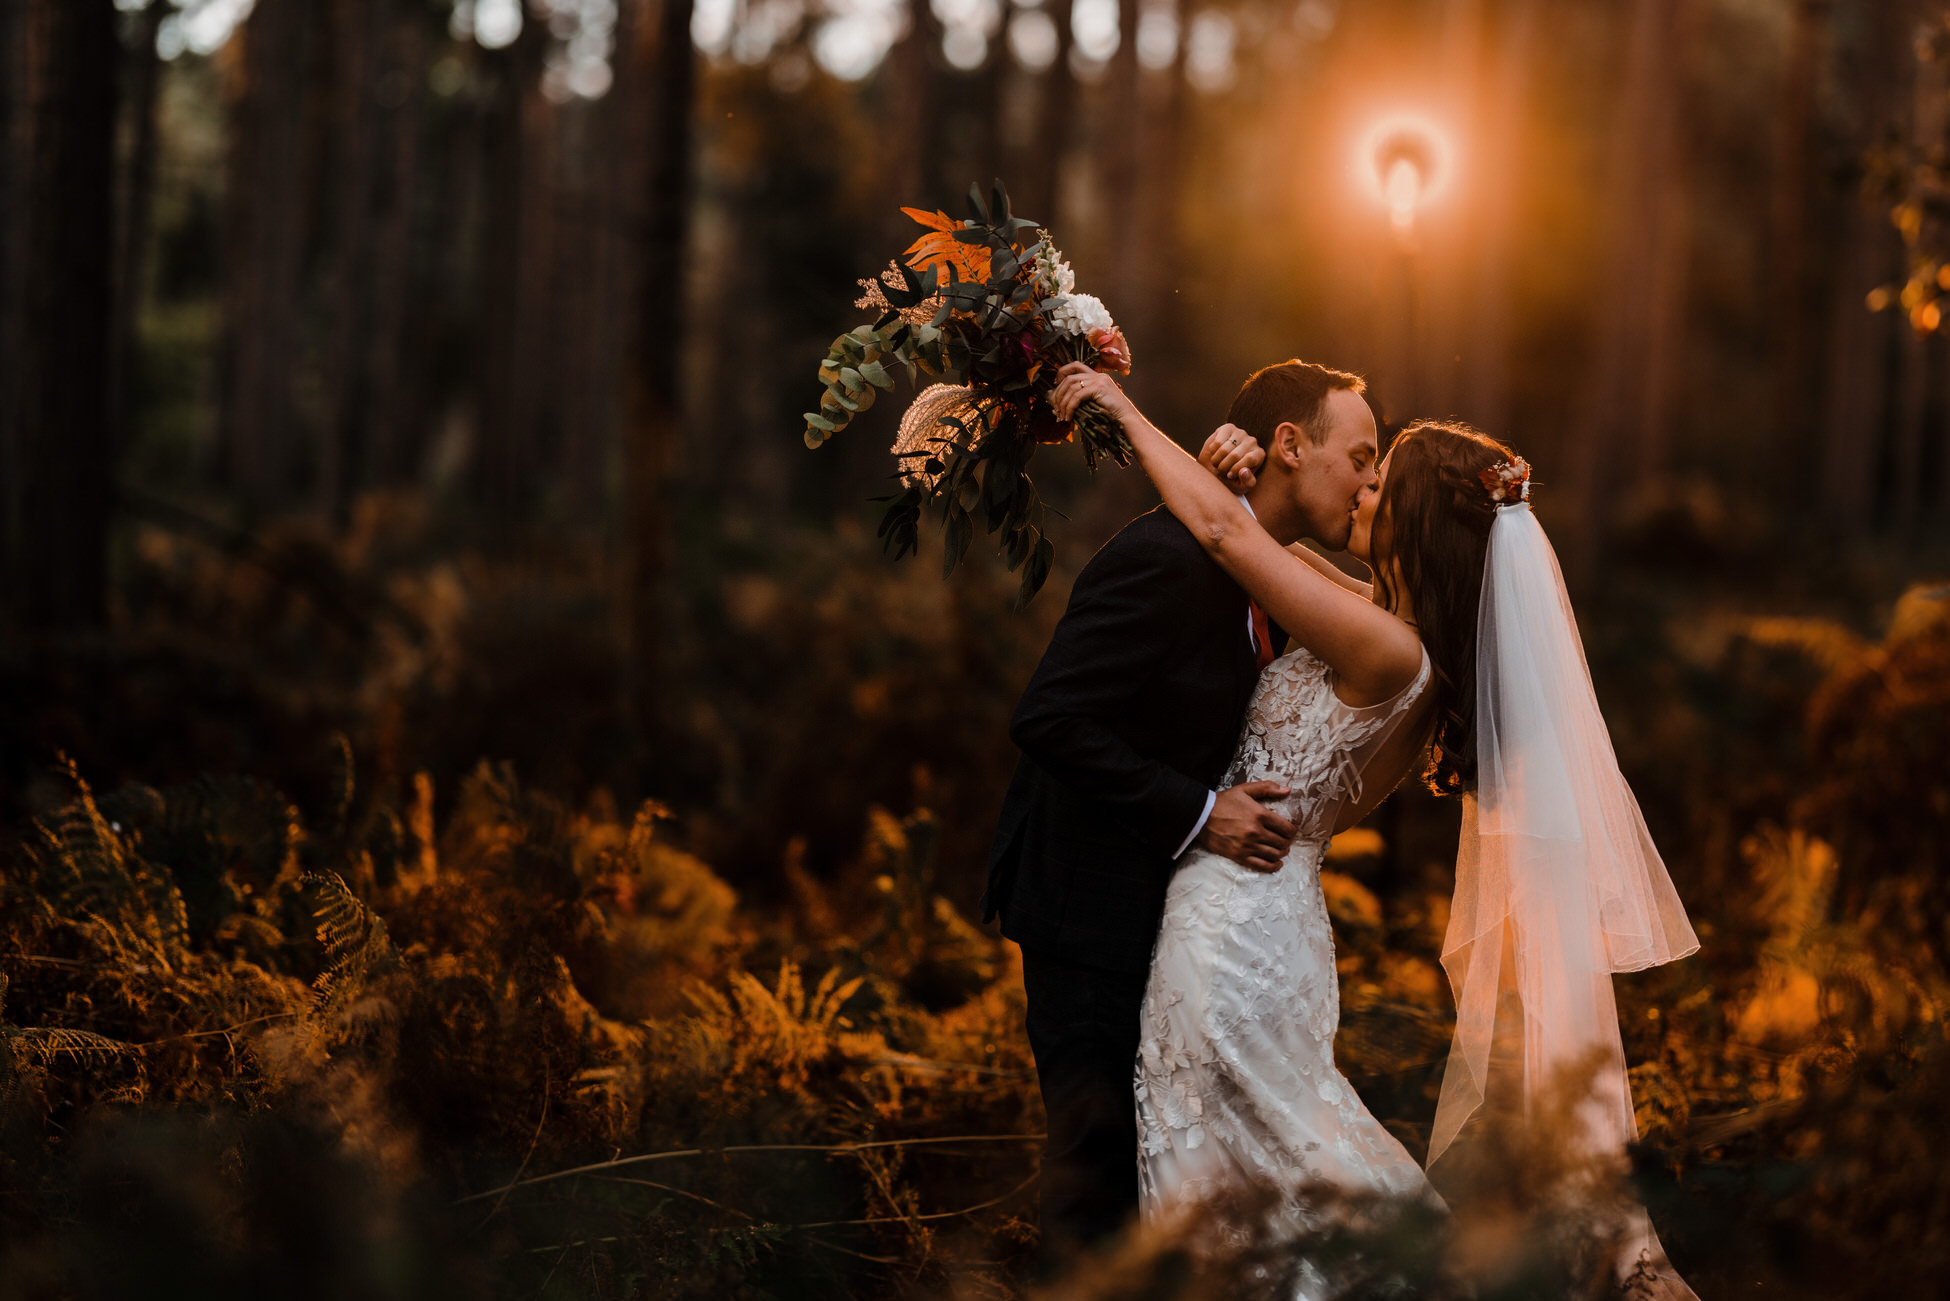 Glorious golden hour wedding photography! Emma and Sam share a hug and a kiss as the sun sets. There's a woodland behind them and she's holding her bouquet with her arms around Sam's shoulders. By Tom Hodgson Photography